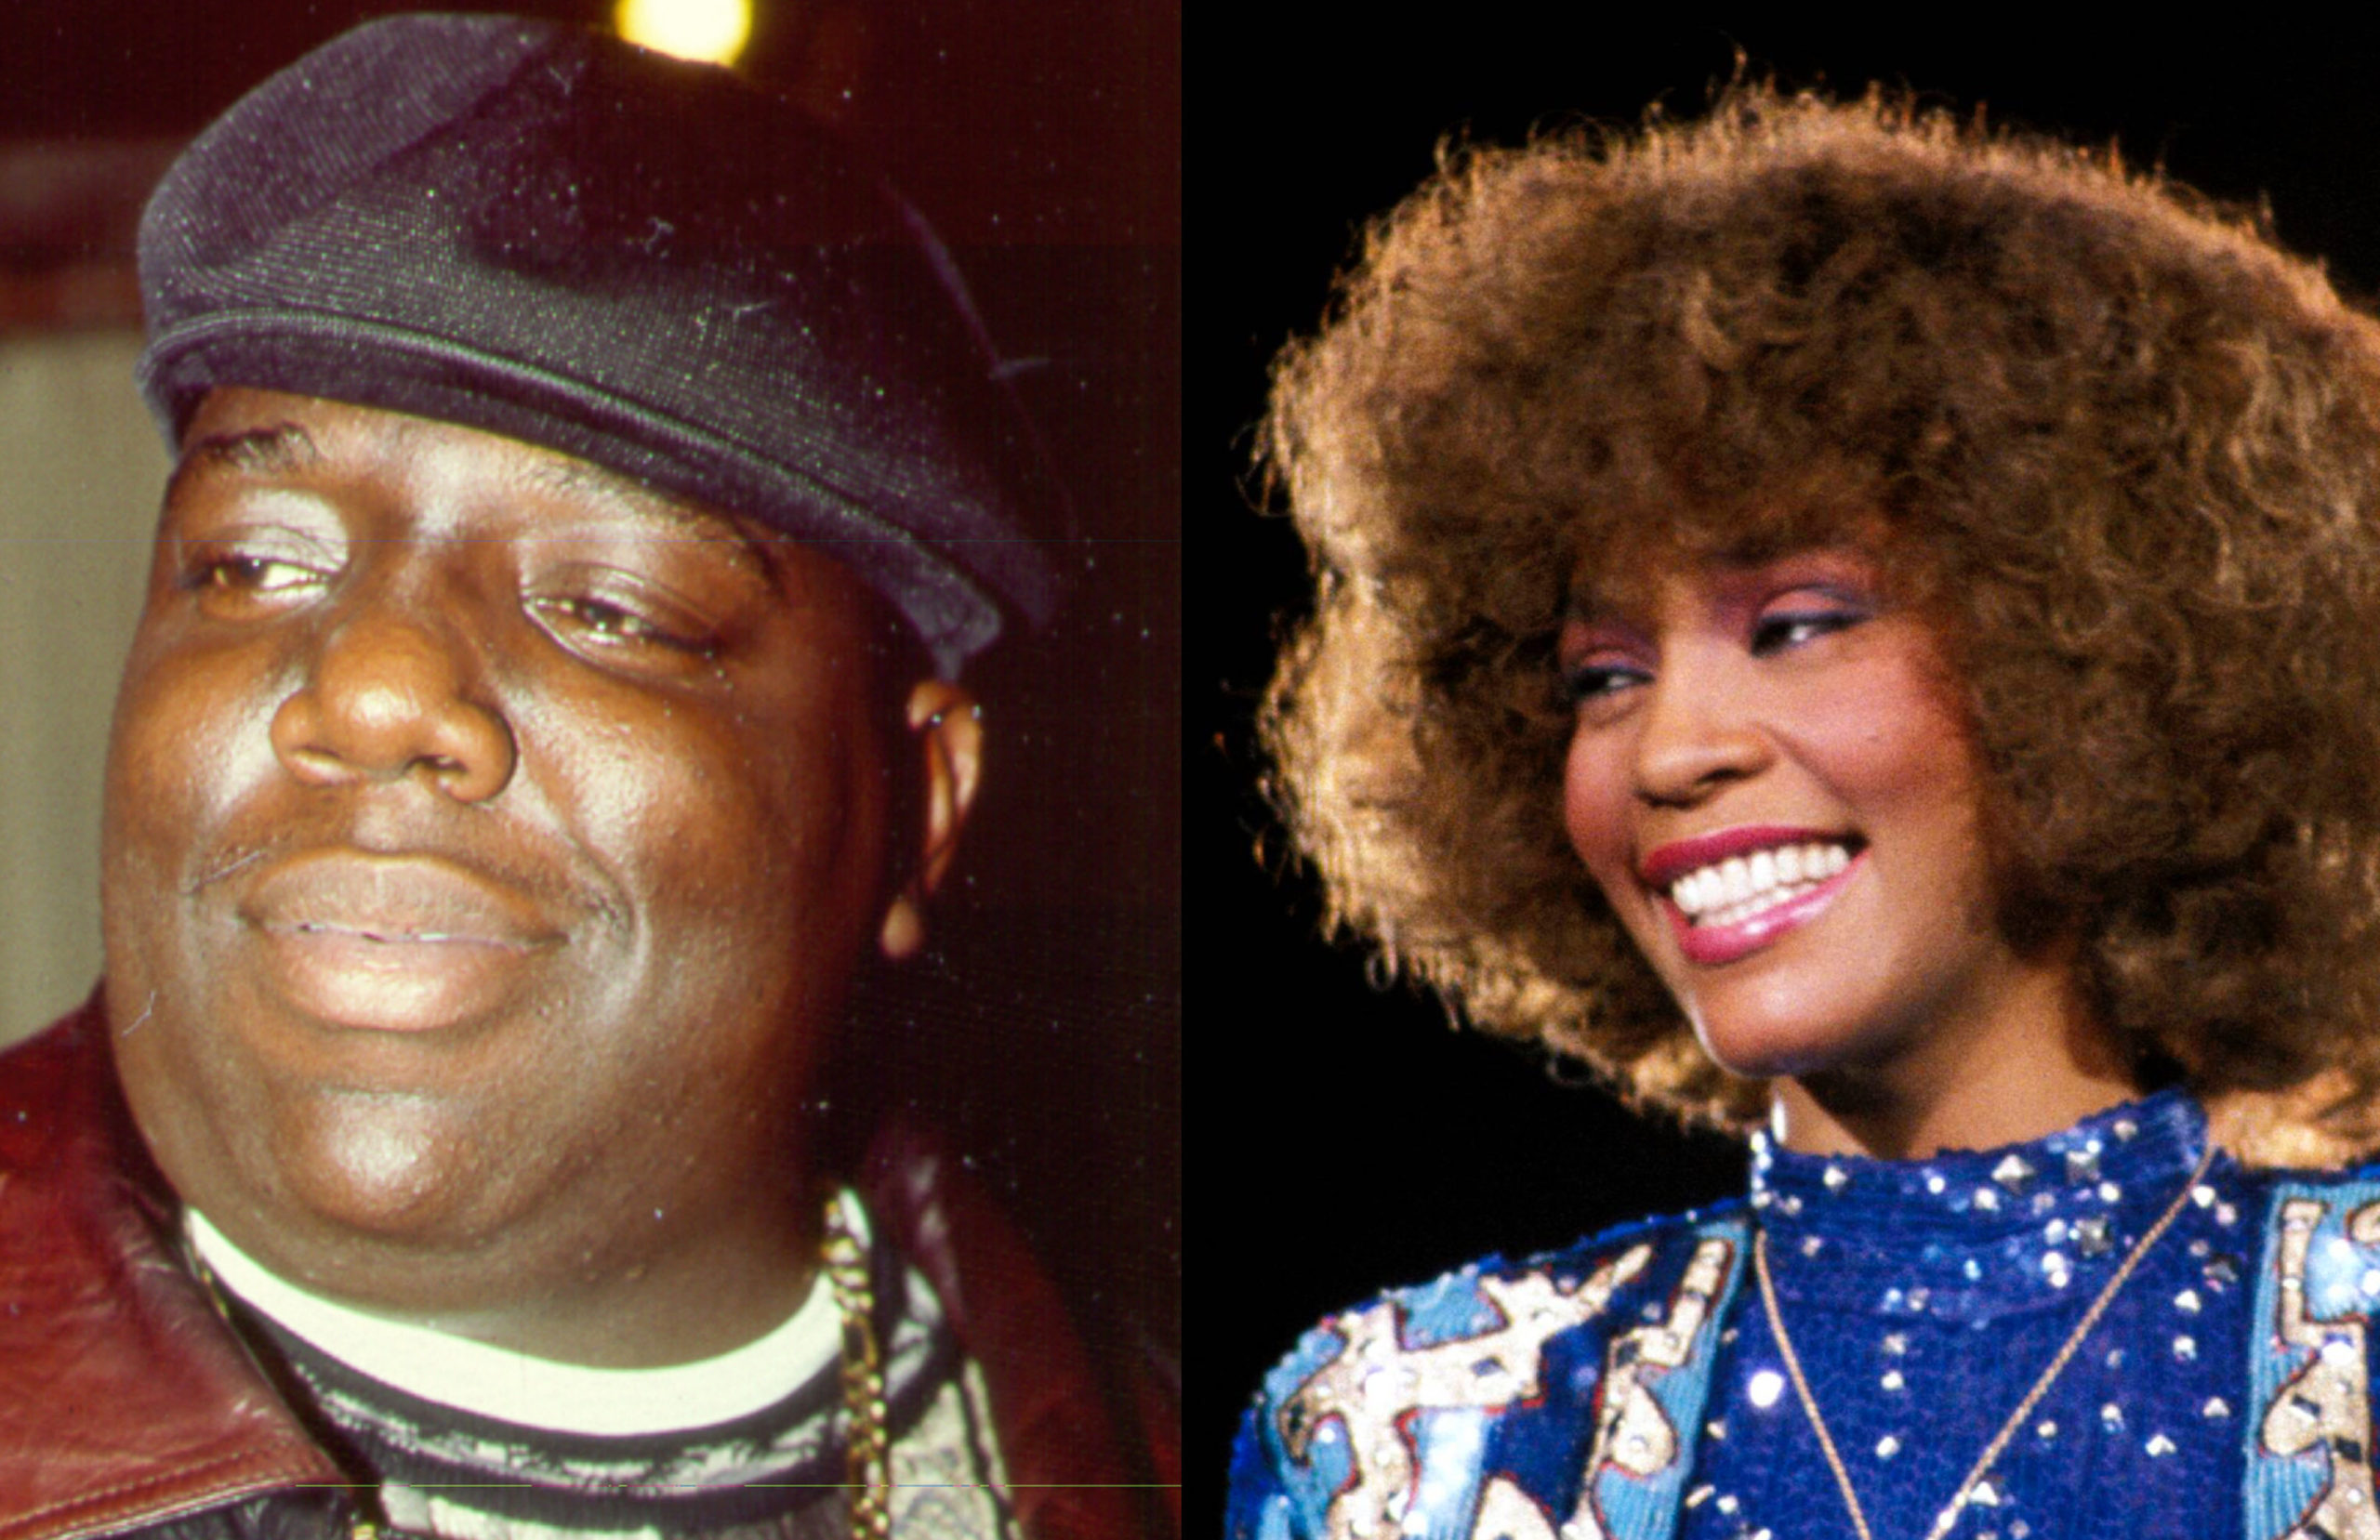 Whitney Houston, Notorious B.I.G. to Be Inducted Into Rock and Roll Hall of Fame